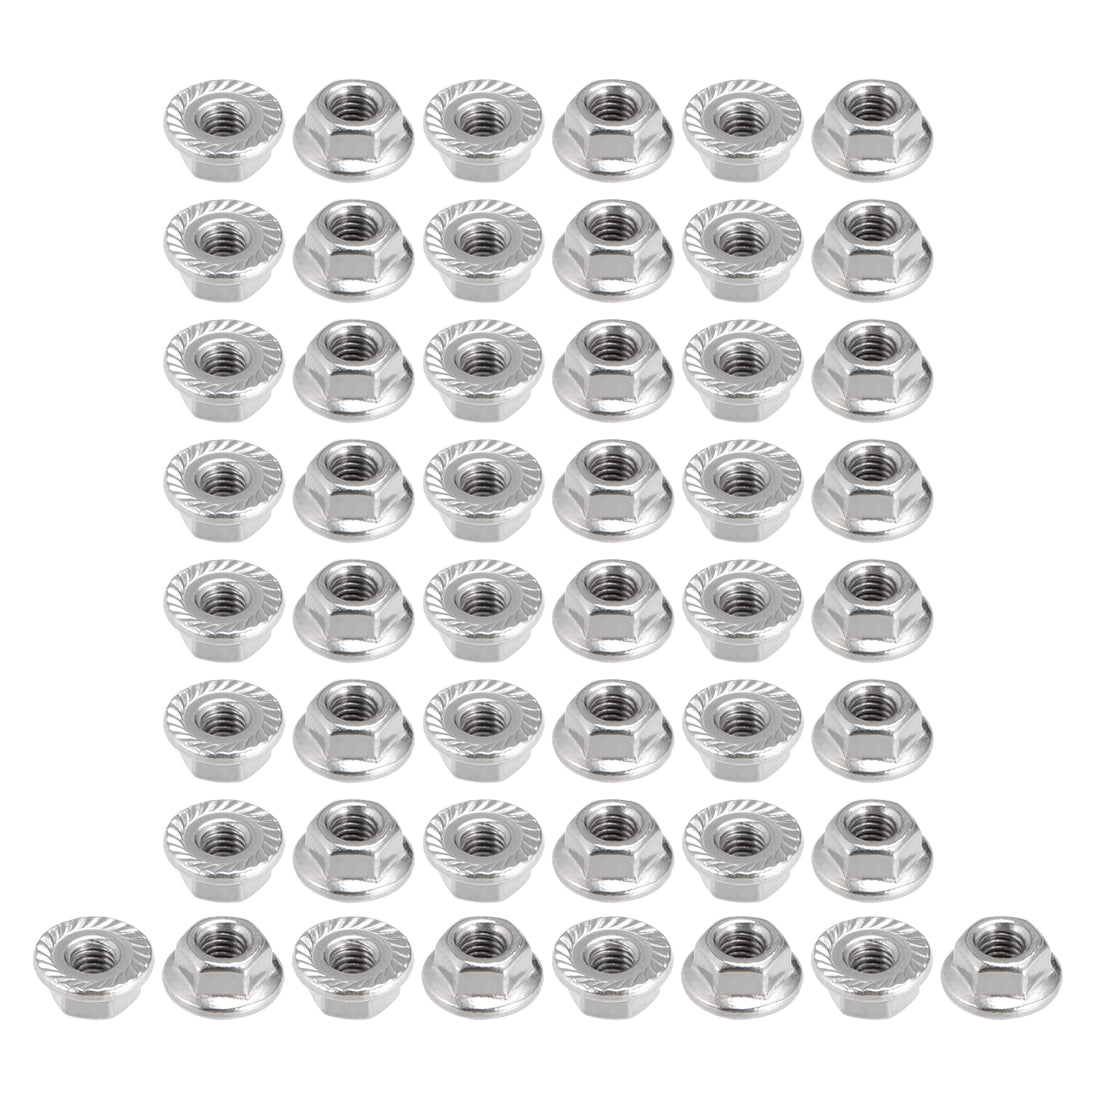 Uxcell Uxcell M3 Serrated Flange Hex Lock Nuts, 304 Stainless Steel, 50 Pcs